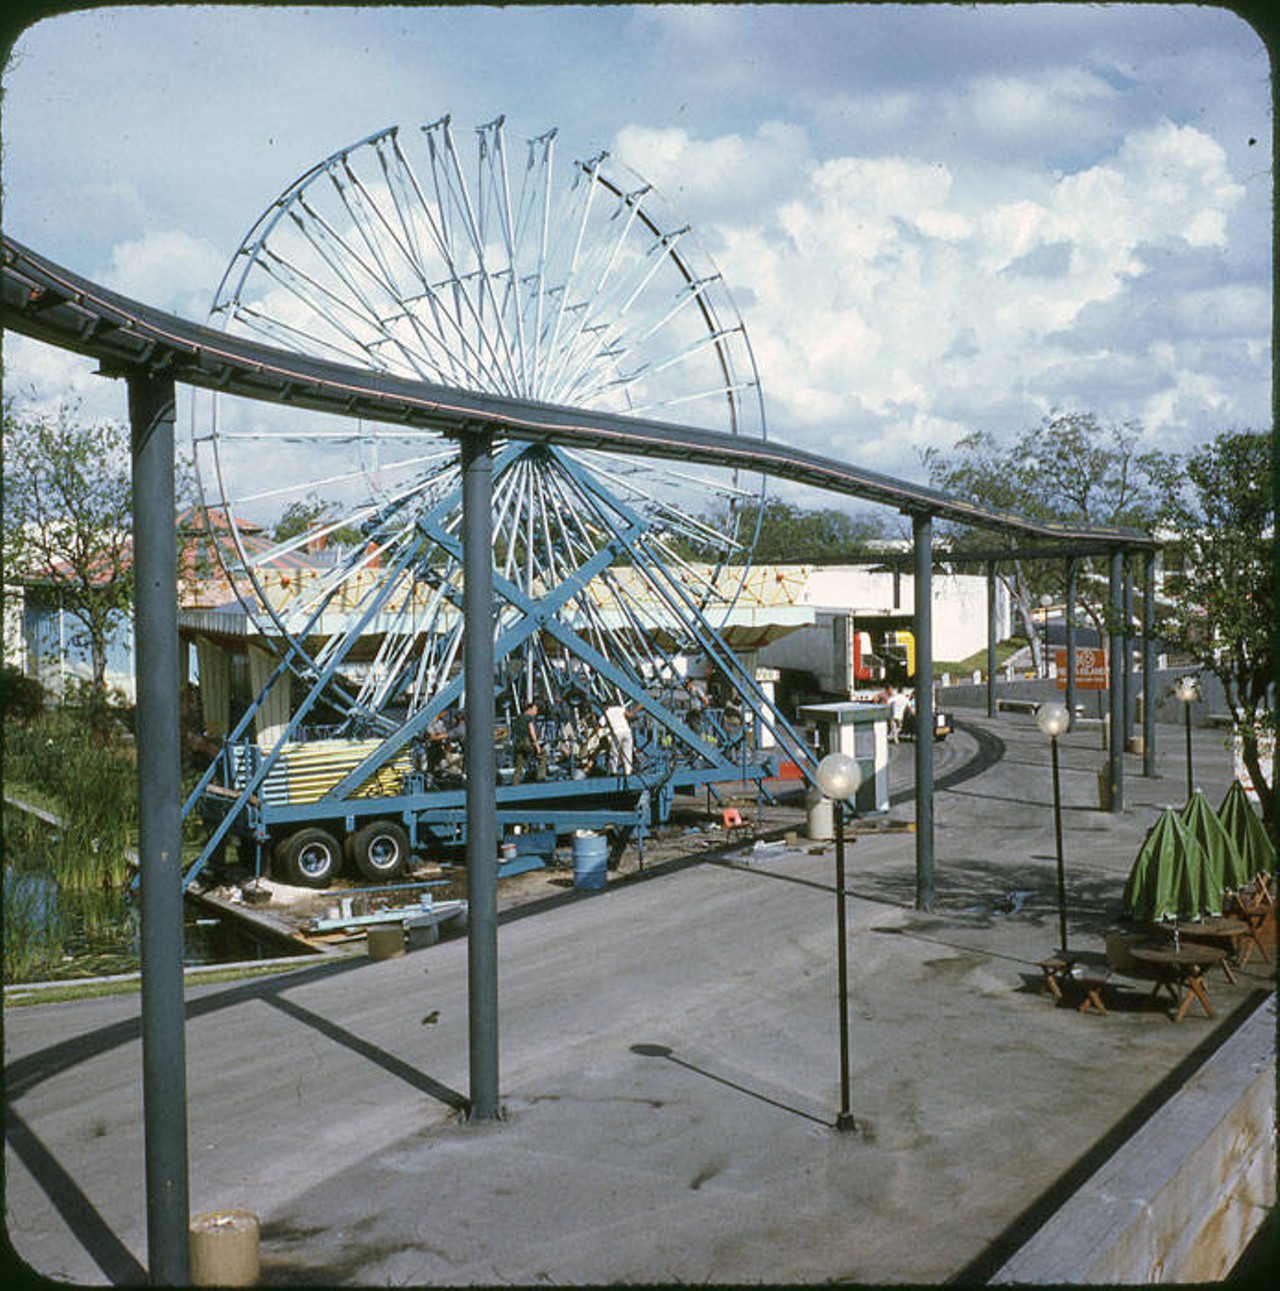 Fiesta Island, rides and games area at HemisFair'68
Why don’t we have this anymore for Fiesta?